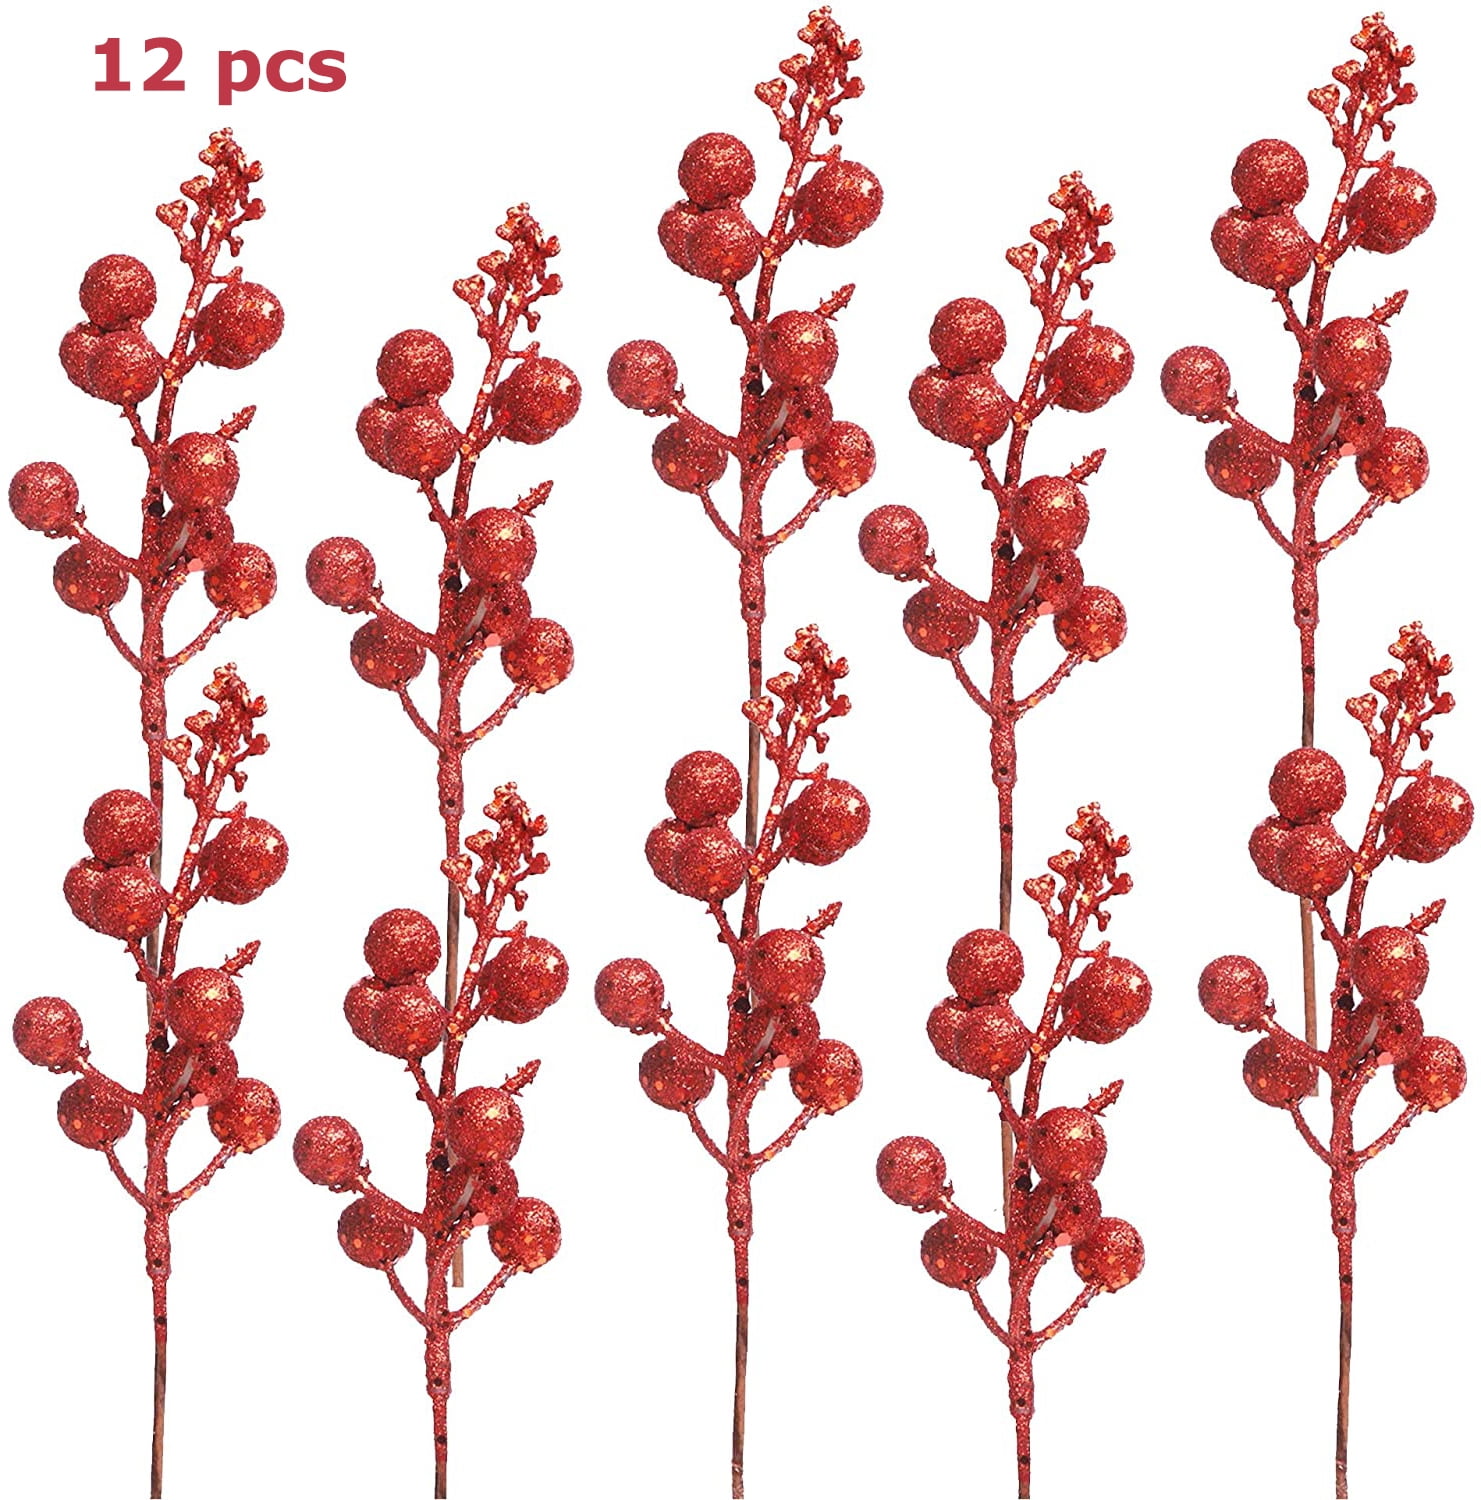  Lvydec 16pcs Christmas Glitter Berry Stems, 7.8 Artificial  Christmas Picks for Christmas Tree Ornaments, DIY Xmas Wreath, Crafts,  Holiday and Home Decor (Black) : Home & Kitchen